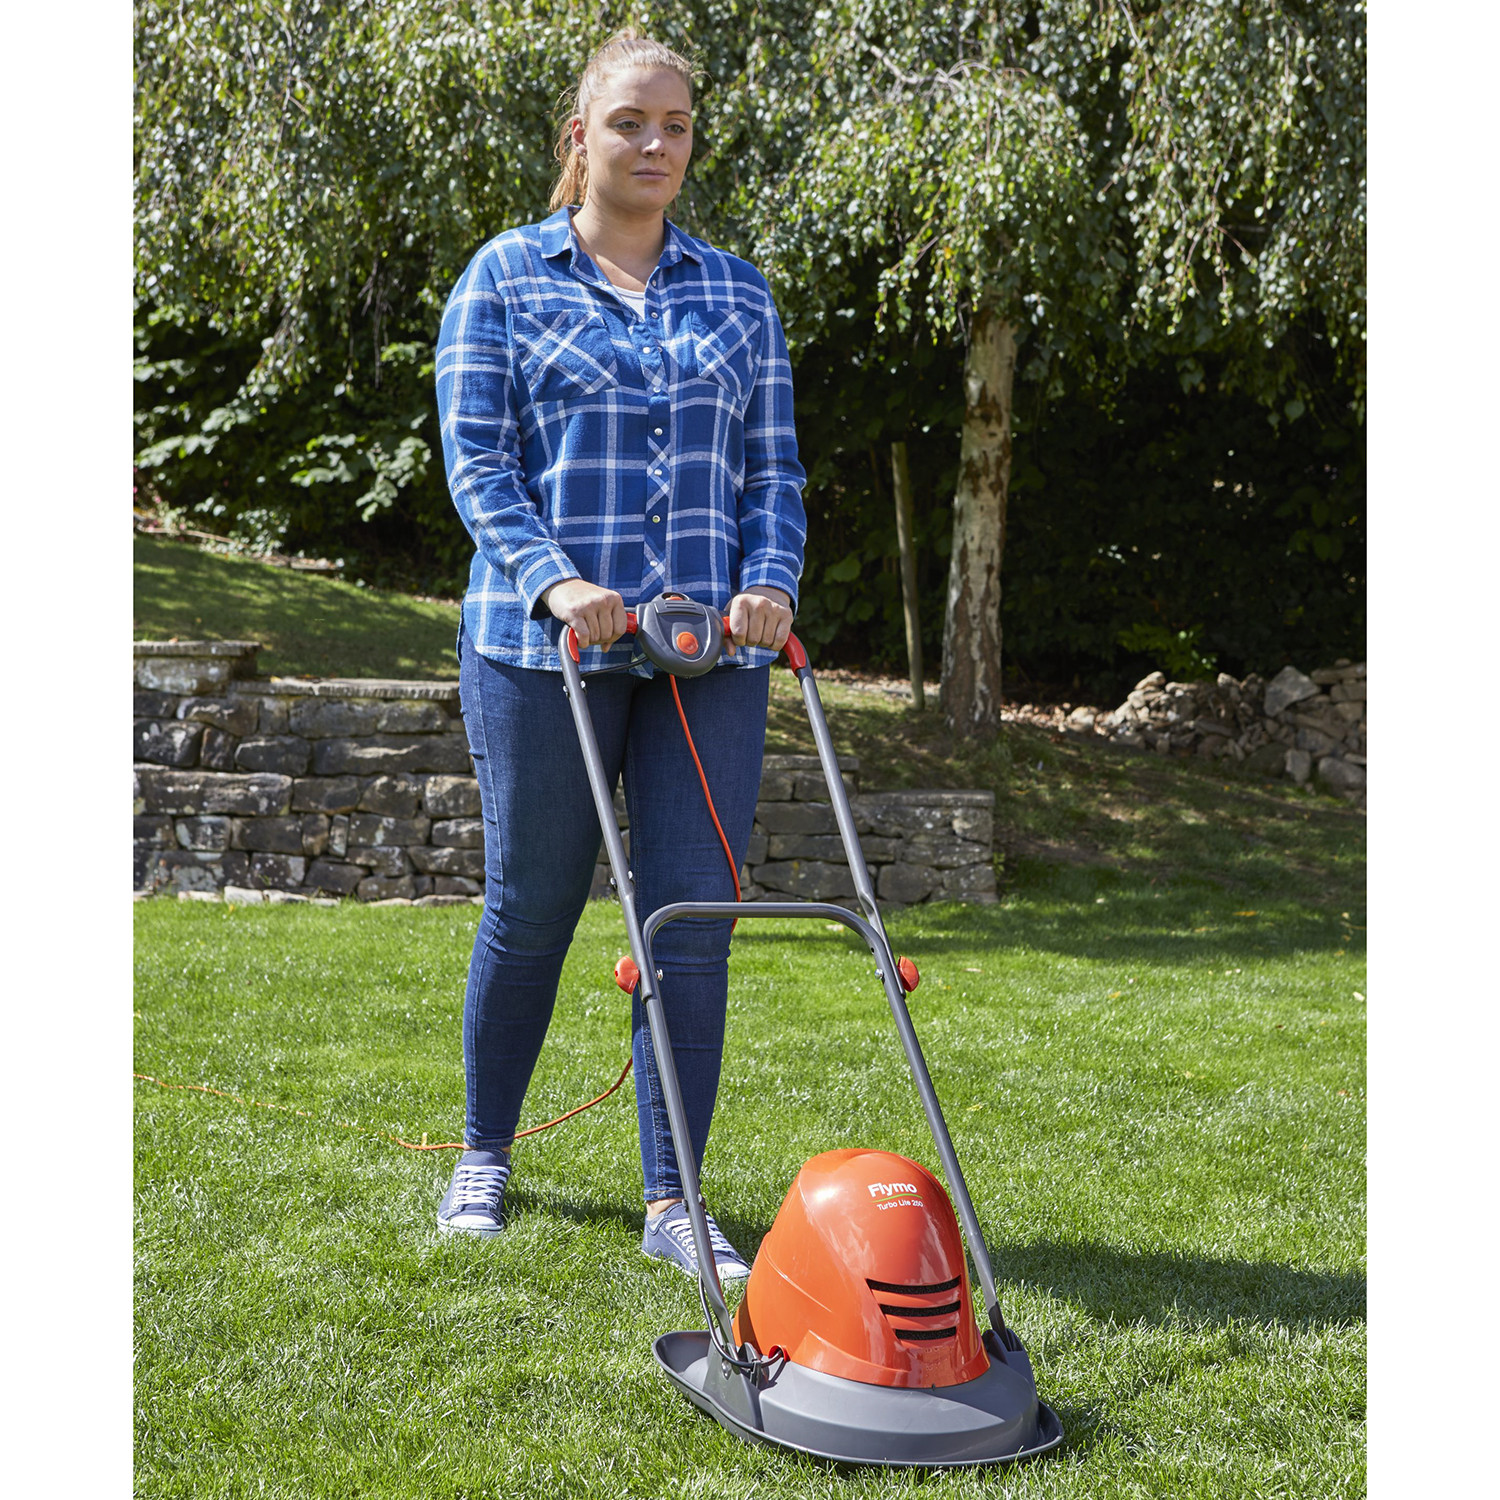 Flymo Hovervac 250 1400W 25cm Hover Lawnmower Image 3